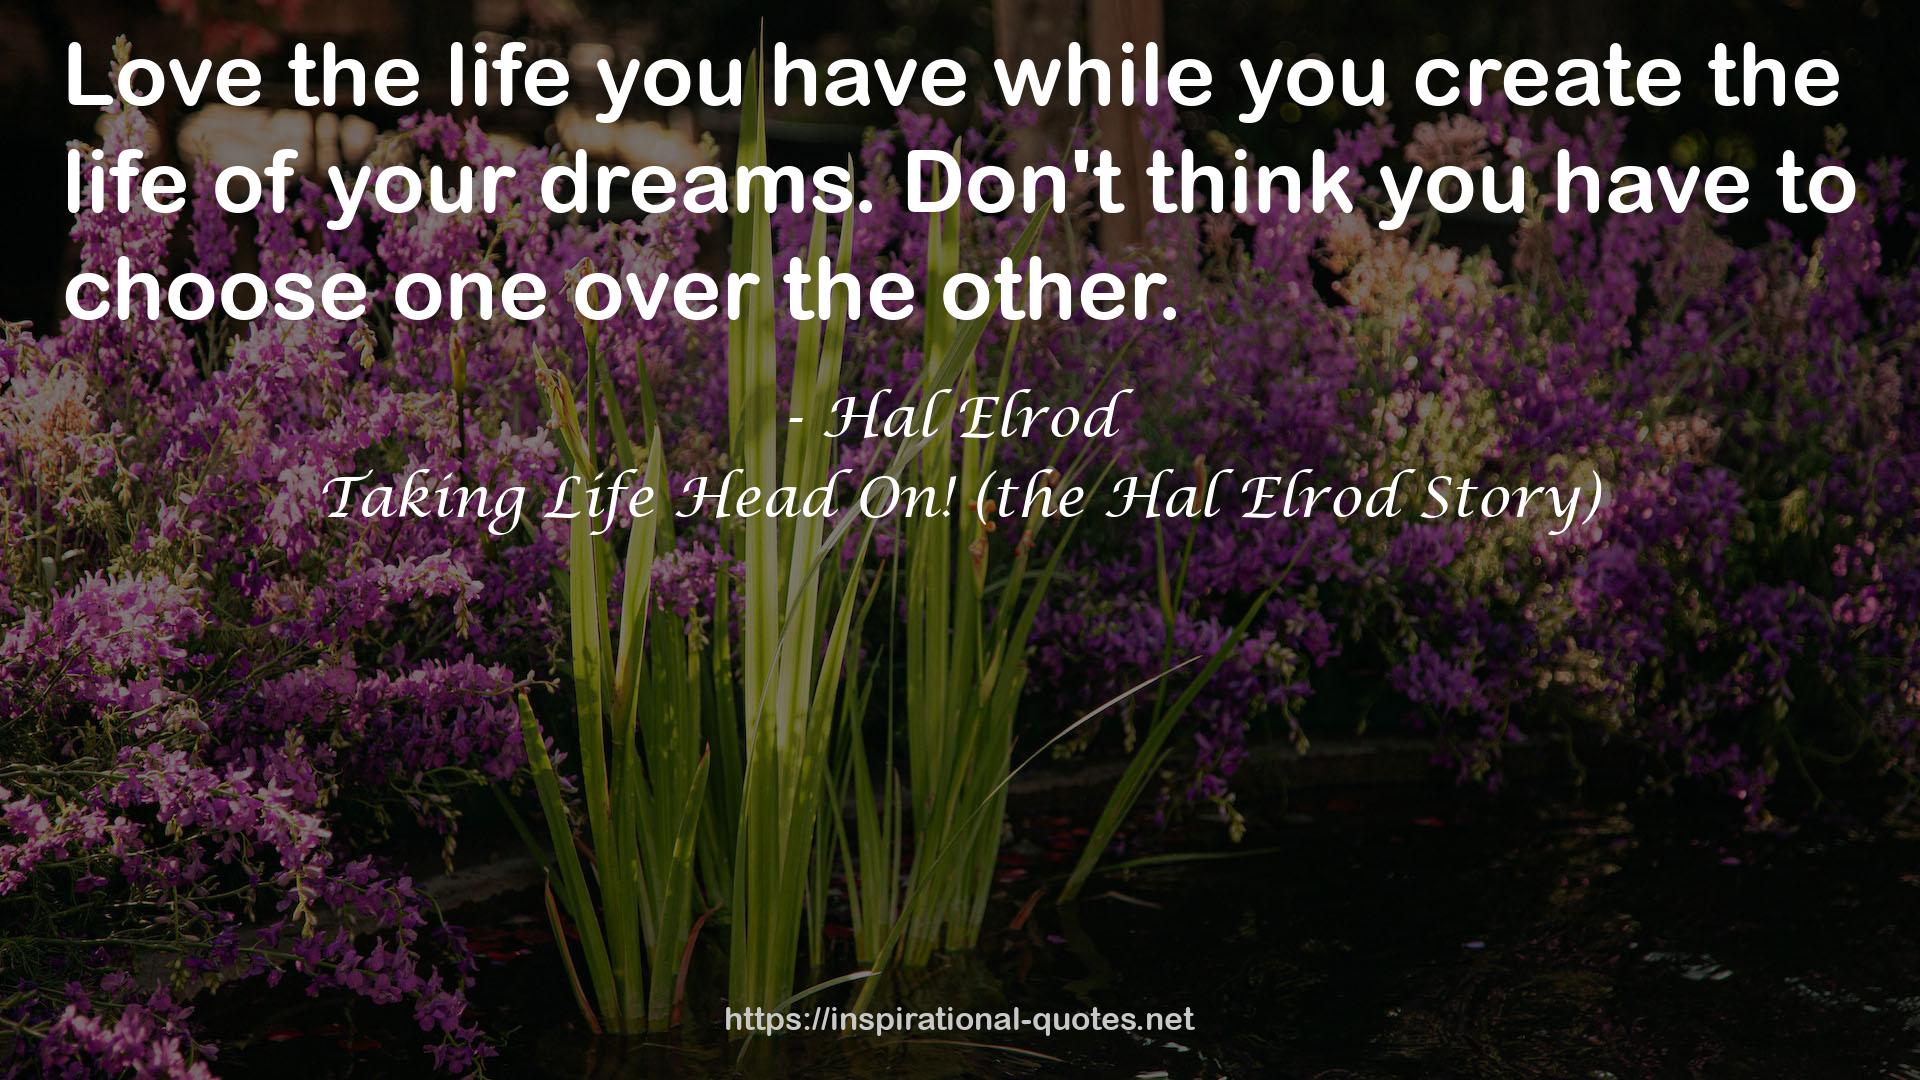 Taking Life Head On! (the Hal Elrod Story) QUOTES